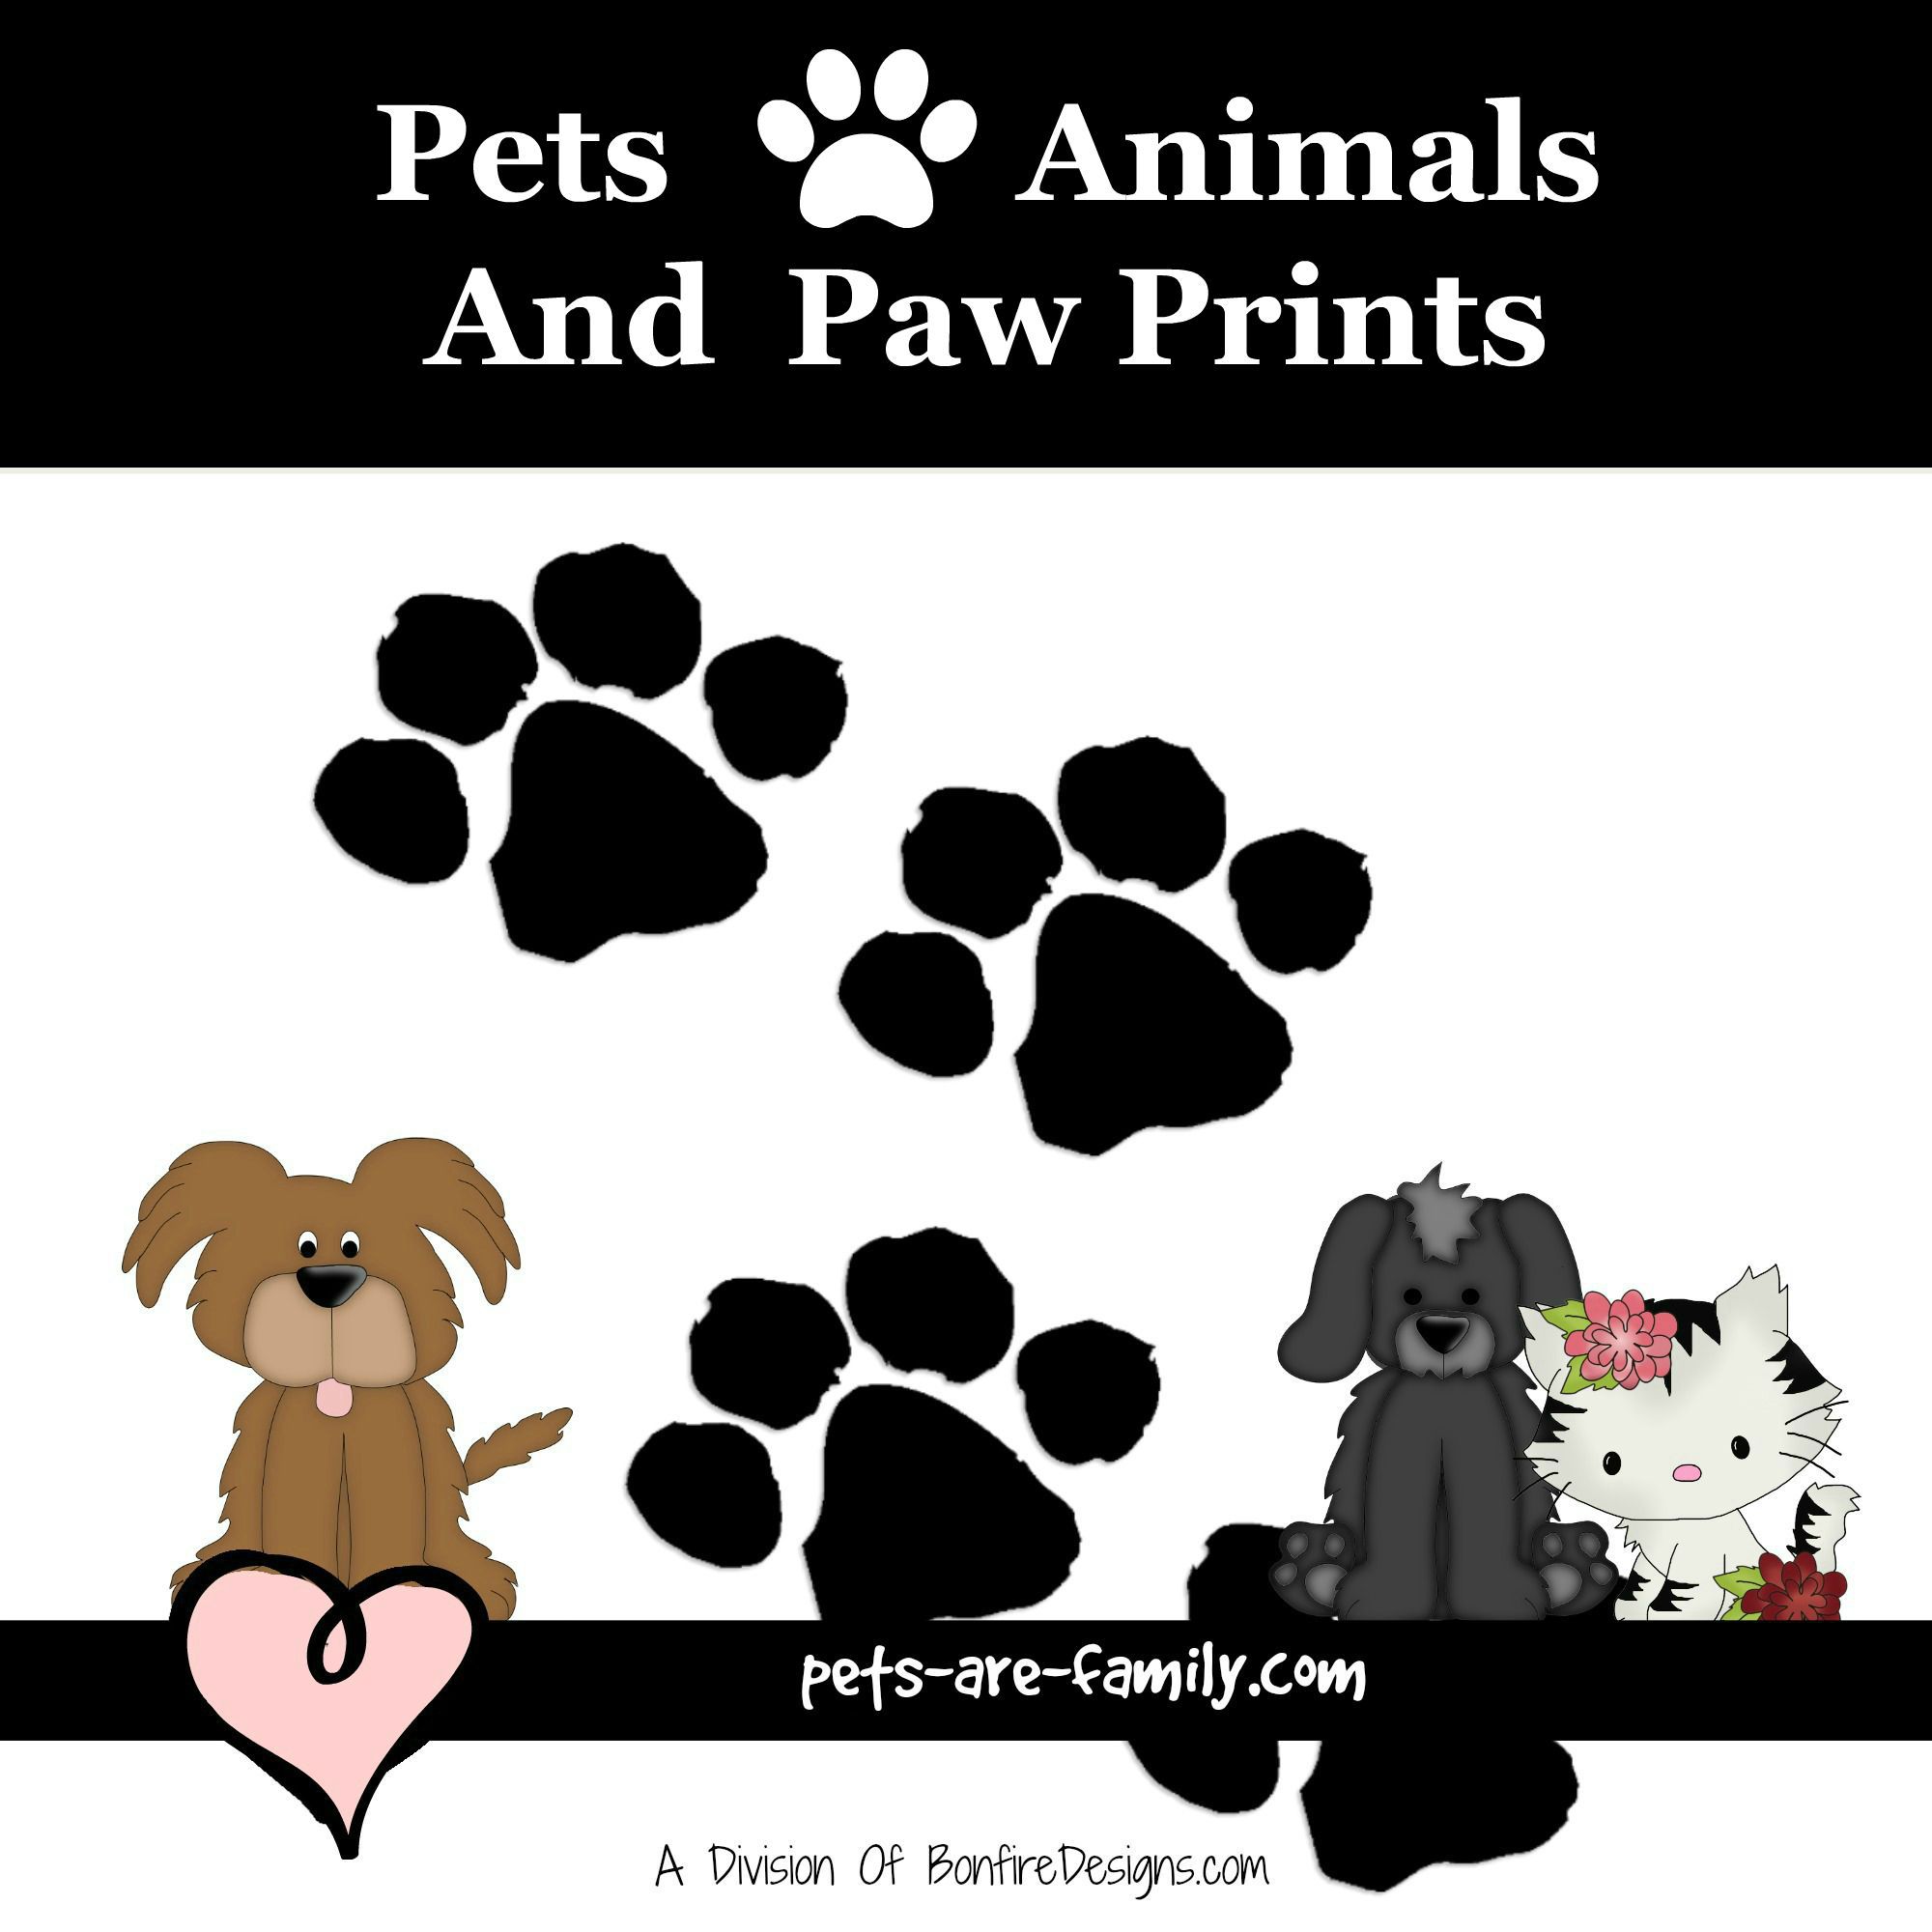 Pets Animals and Paw Prints Gift Ideas